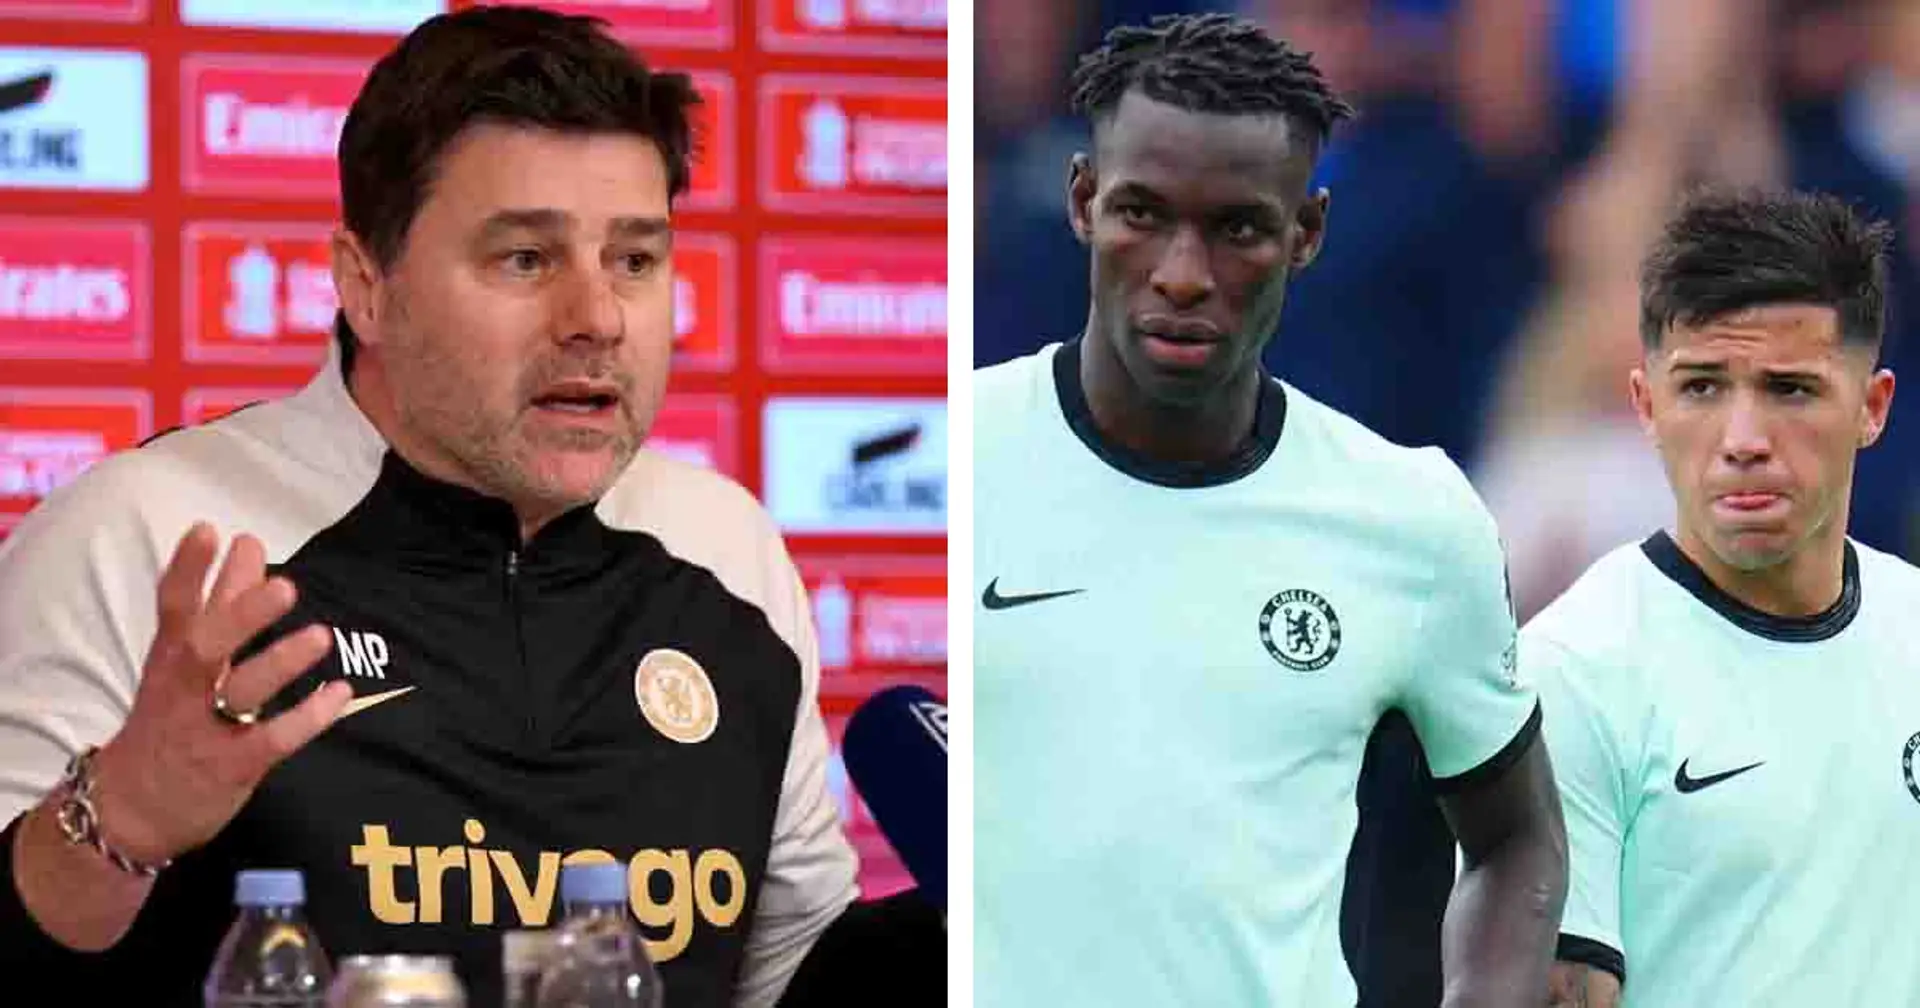 'You cannot compare': Poch explains why overwhelming expectations are unfair on Jackson and Enzo